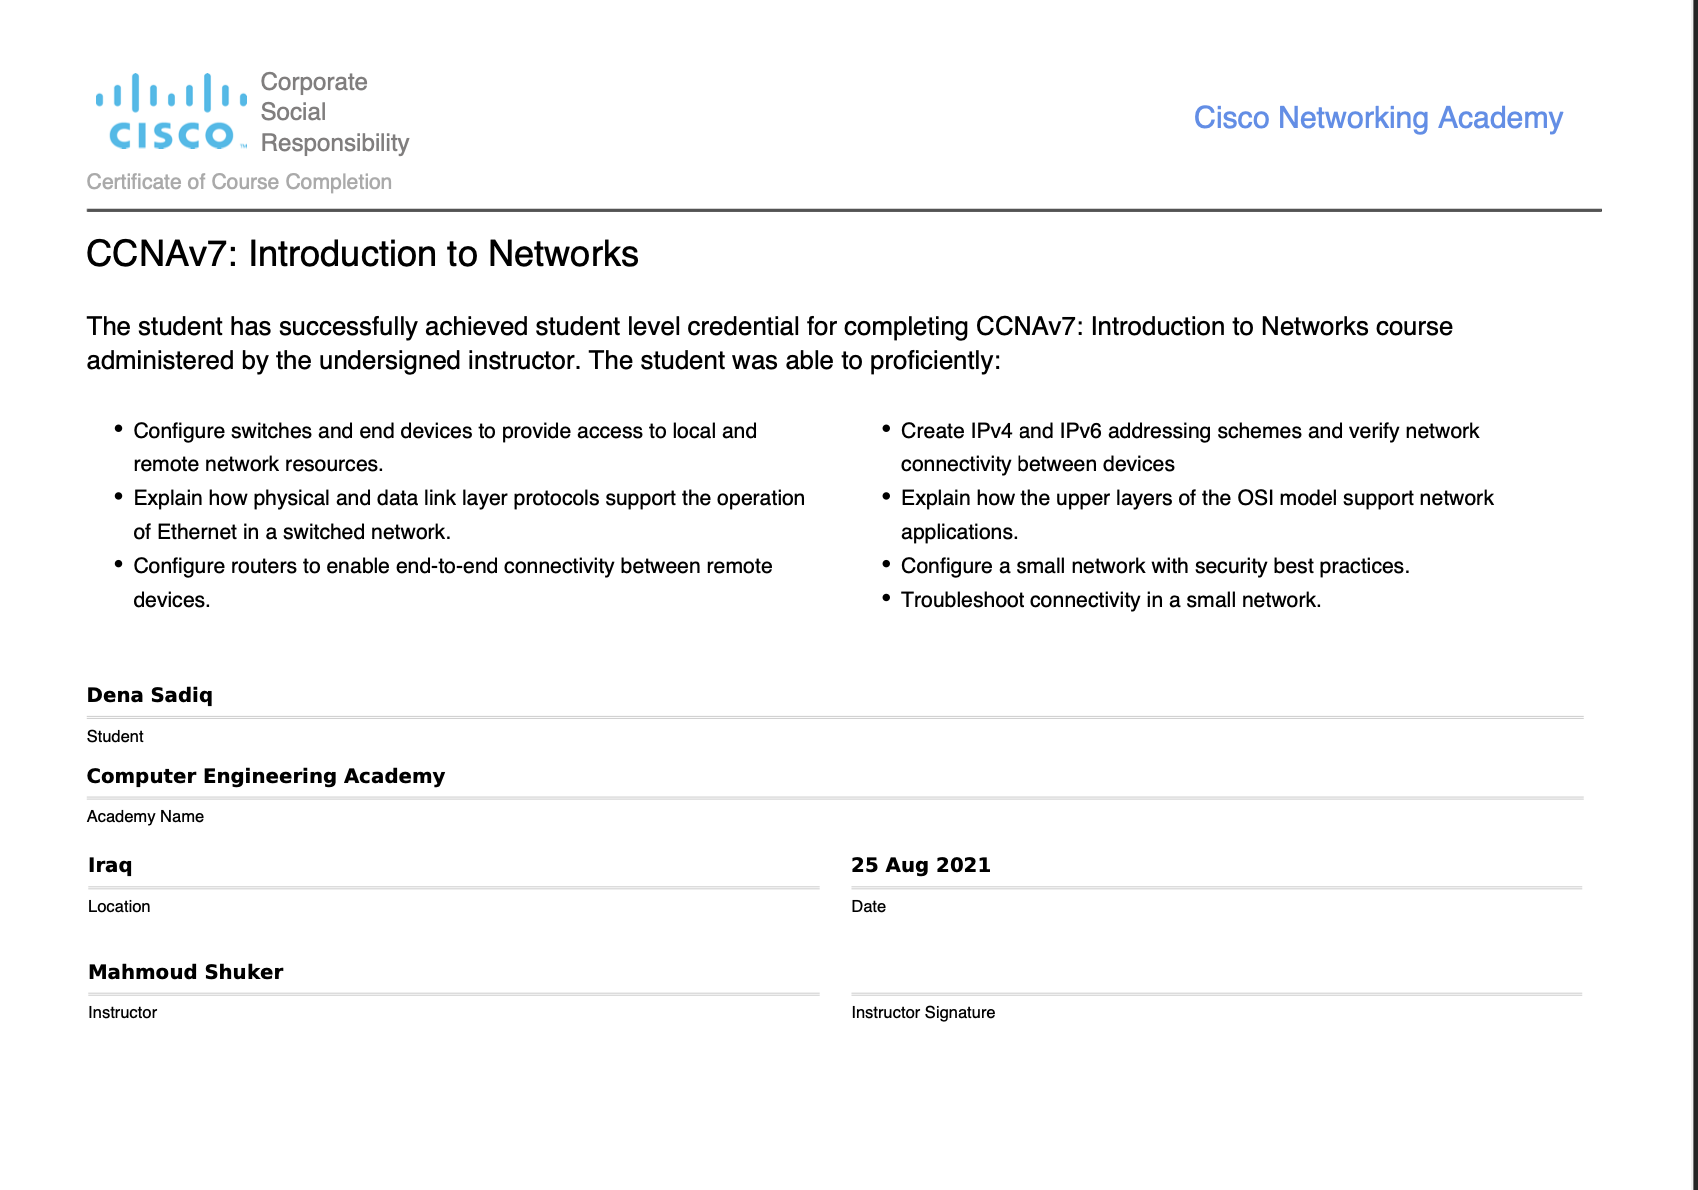 CCNAv7: Introduction to Networks